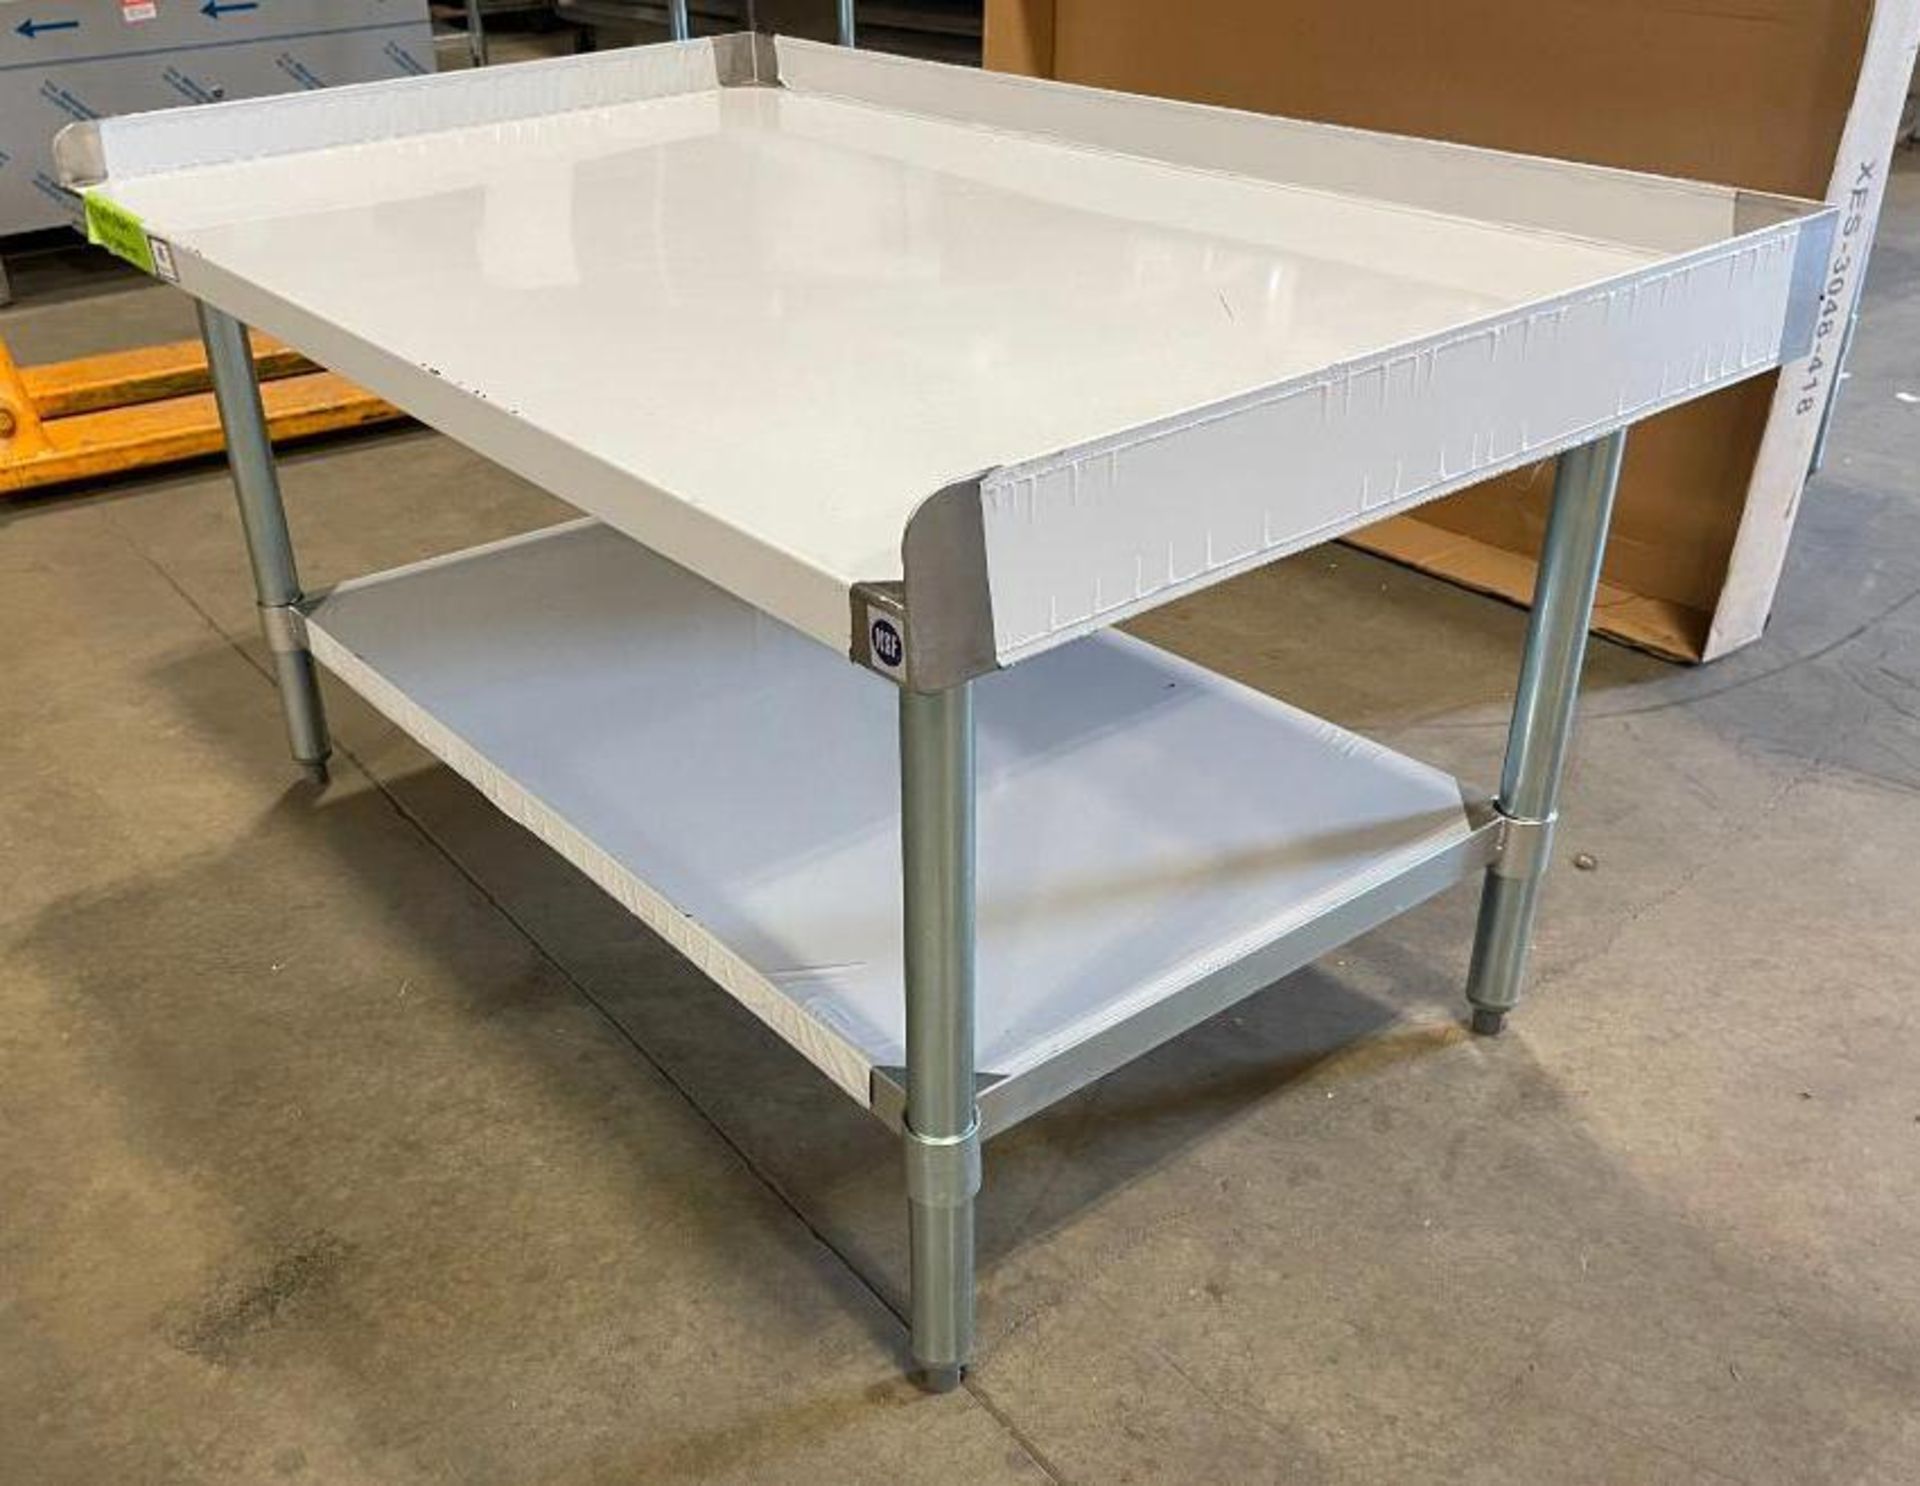 CHEF'S MATE 30" X 48" STAINLESS STEEL EQUIPMENT STAND - NEW - Image 2 of 10